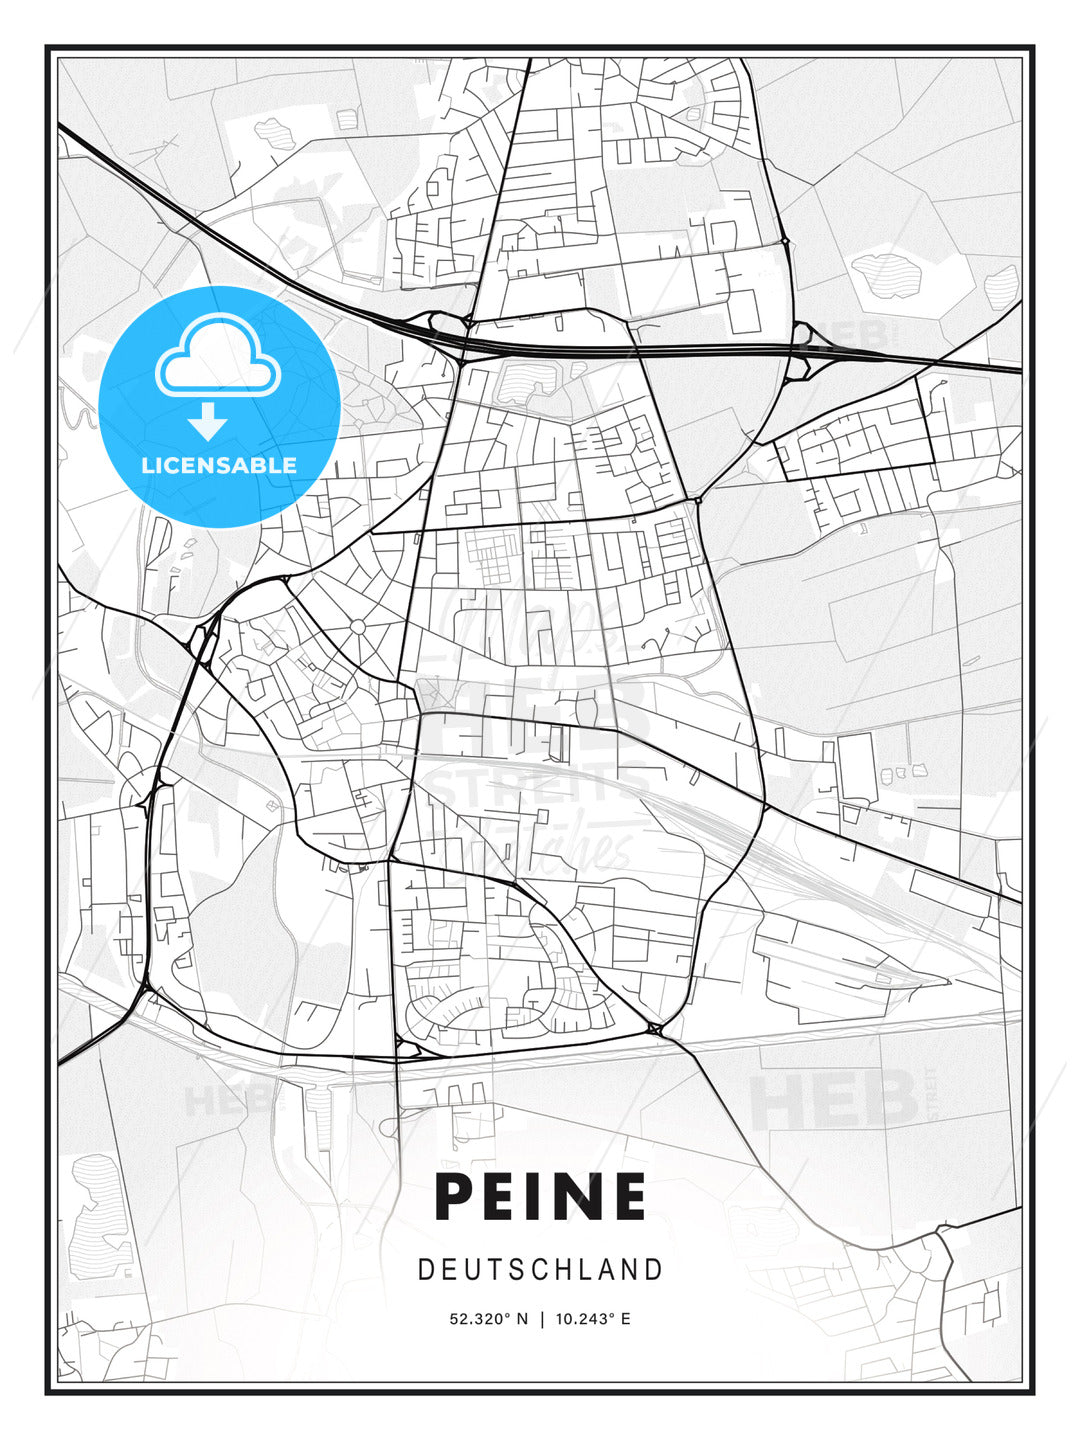 Peine, Germany, Modern Print Template in Various Formats - HEBSTREITS Sketches